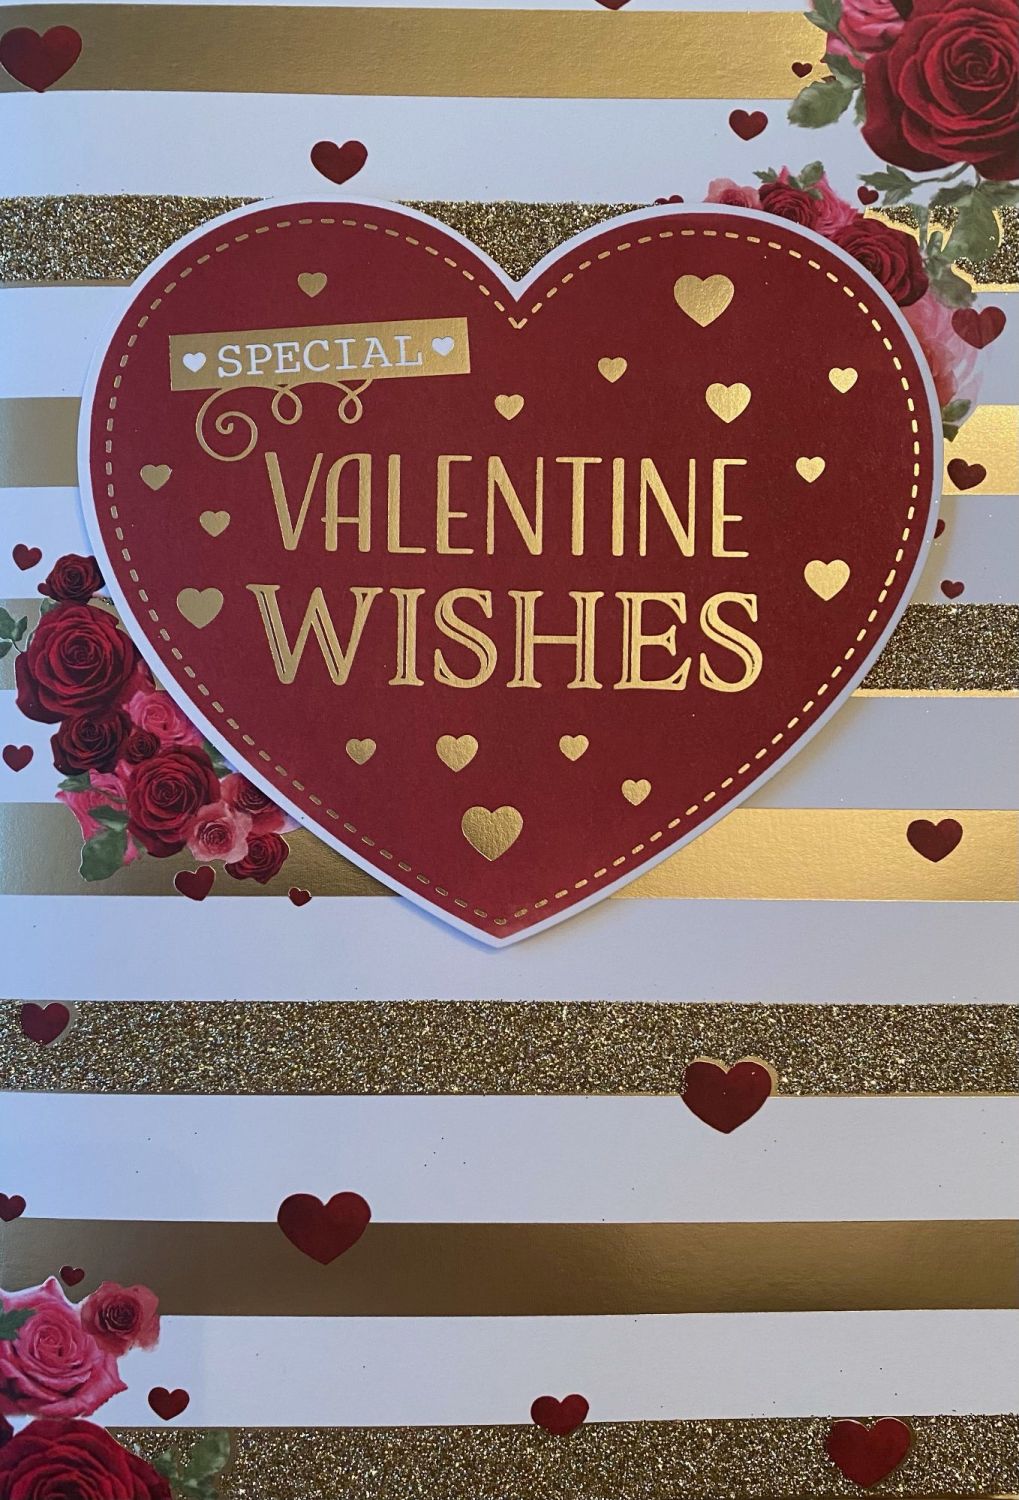 Special Valentine Wishes - Card